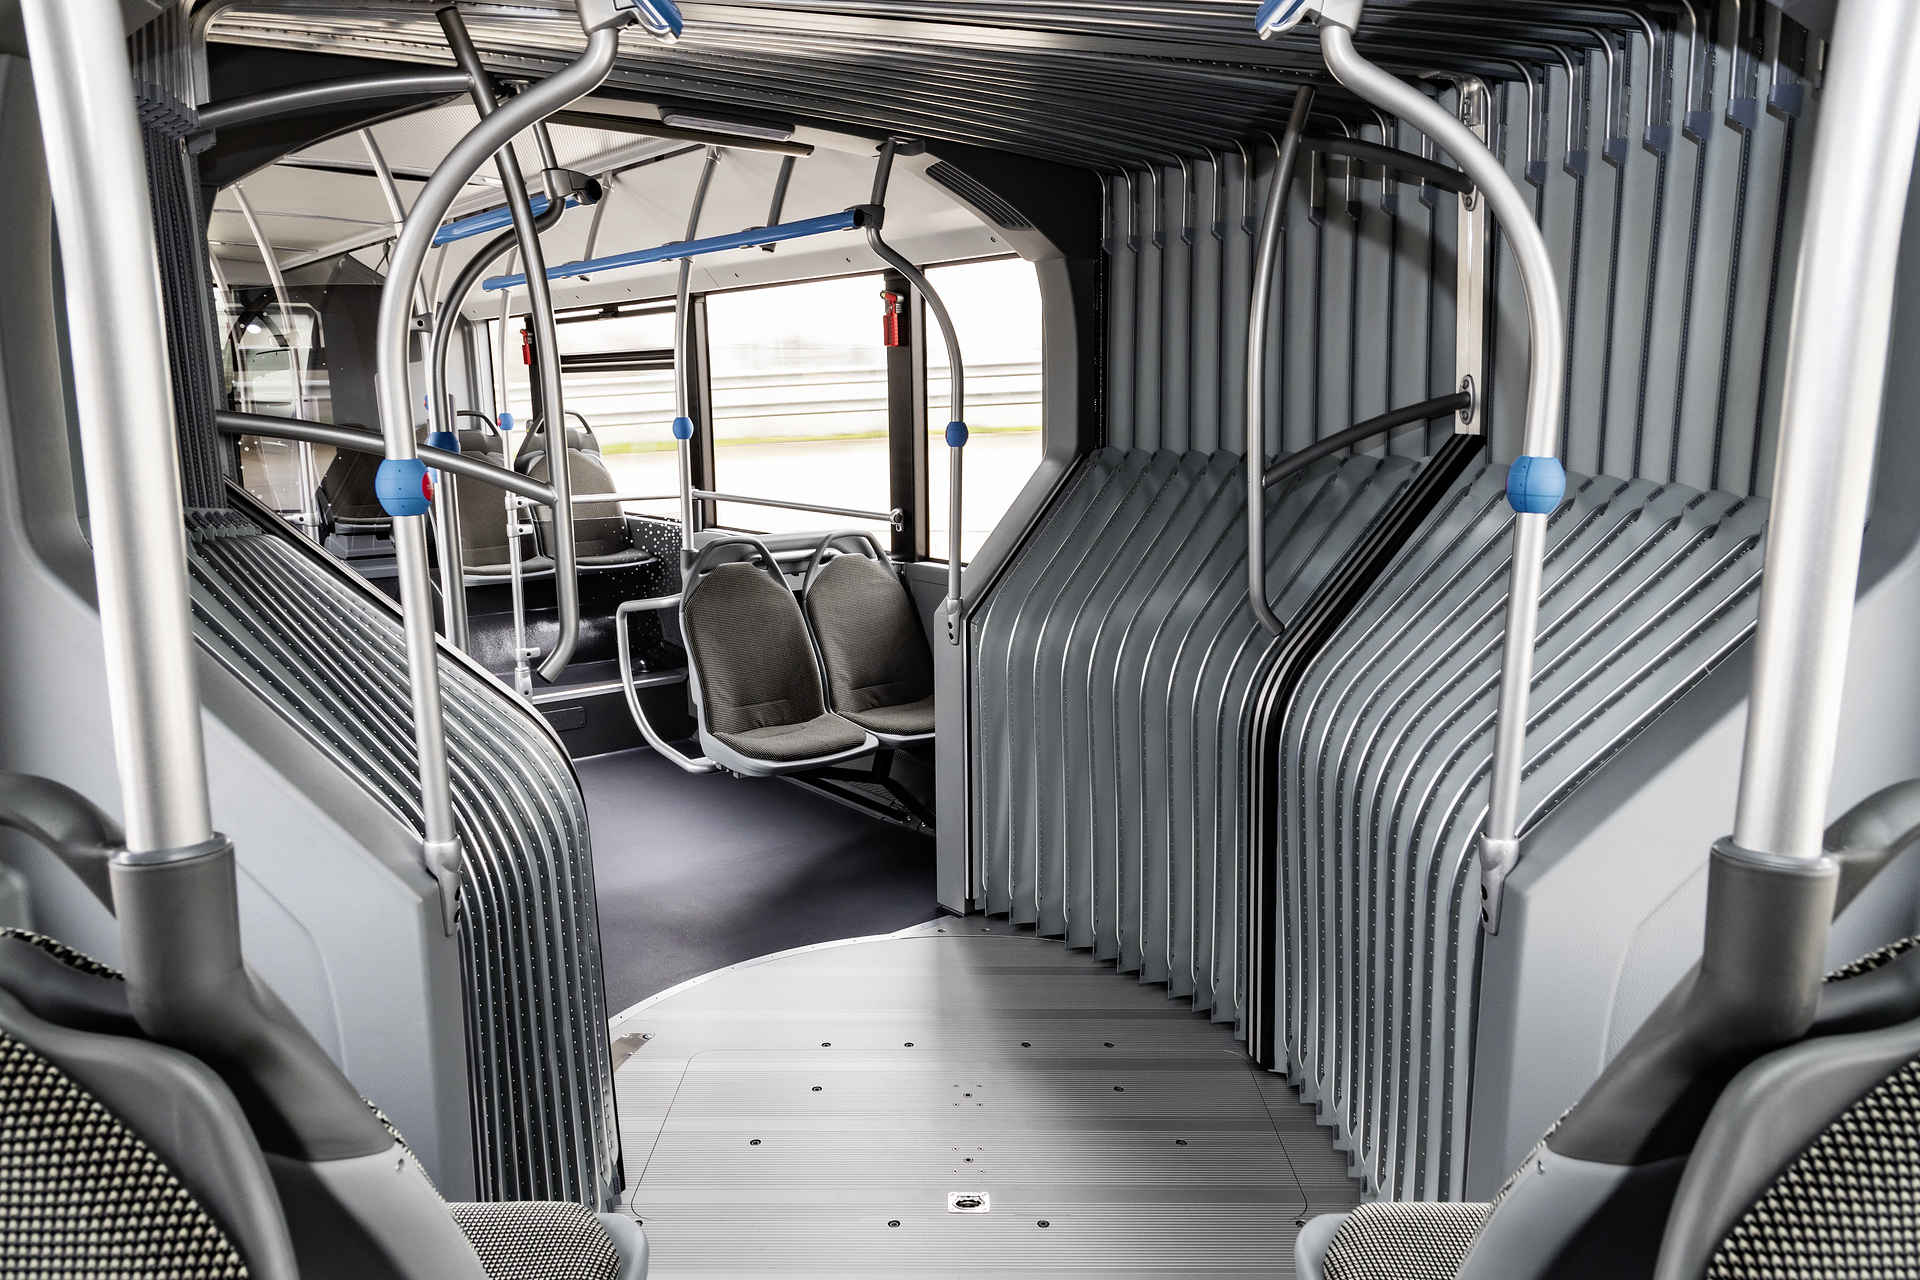 Fully-electric Mercedes-Benz eCitaro G articulated bus complements the electric range from Daimler Buses